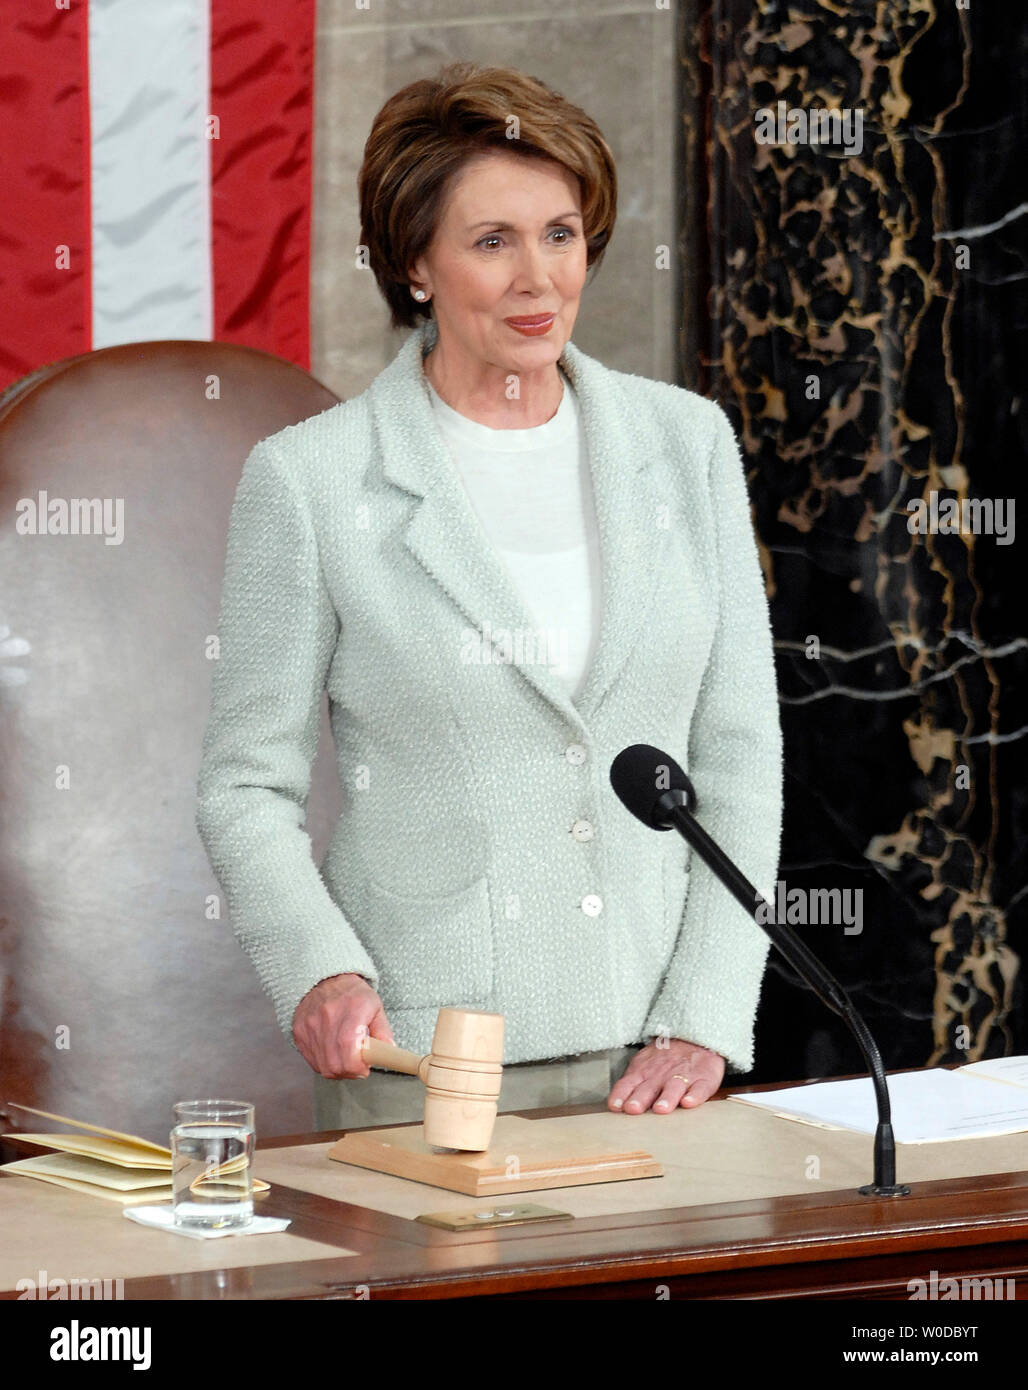 Speaker of the House Nancy Pelosi, D-CA, presides over a Joint Session of Congress as she waits for U.S. President George W. Bush to deliver his State of the Union address in the House of Representatives Chamber of the U.S. Capitol in Washington on January 23, 2007.    (UPI Photo/Kevin Dietsch) Stock Photo